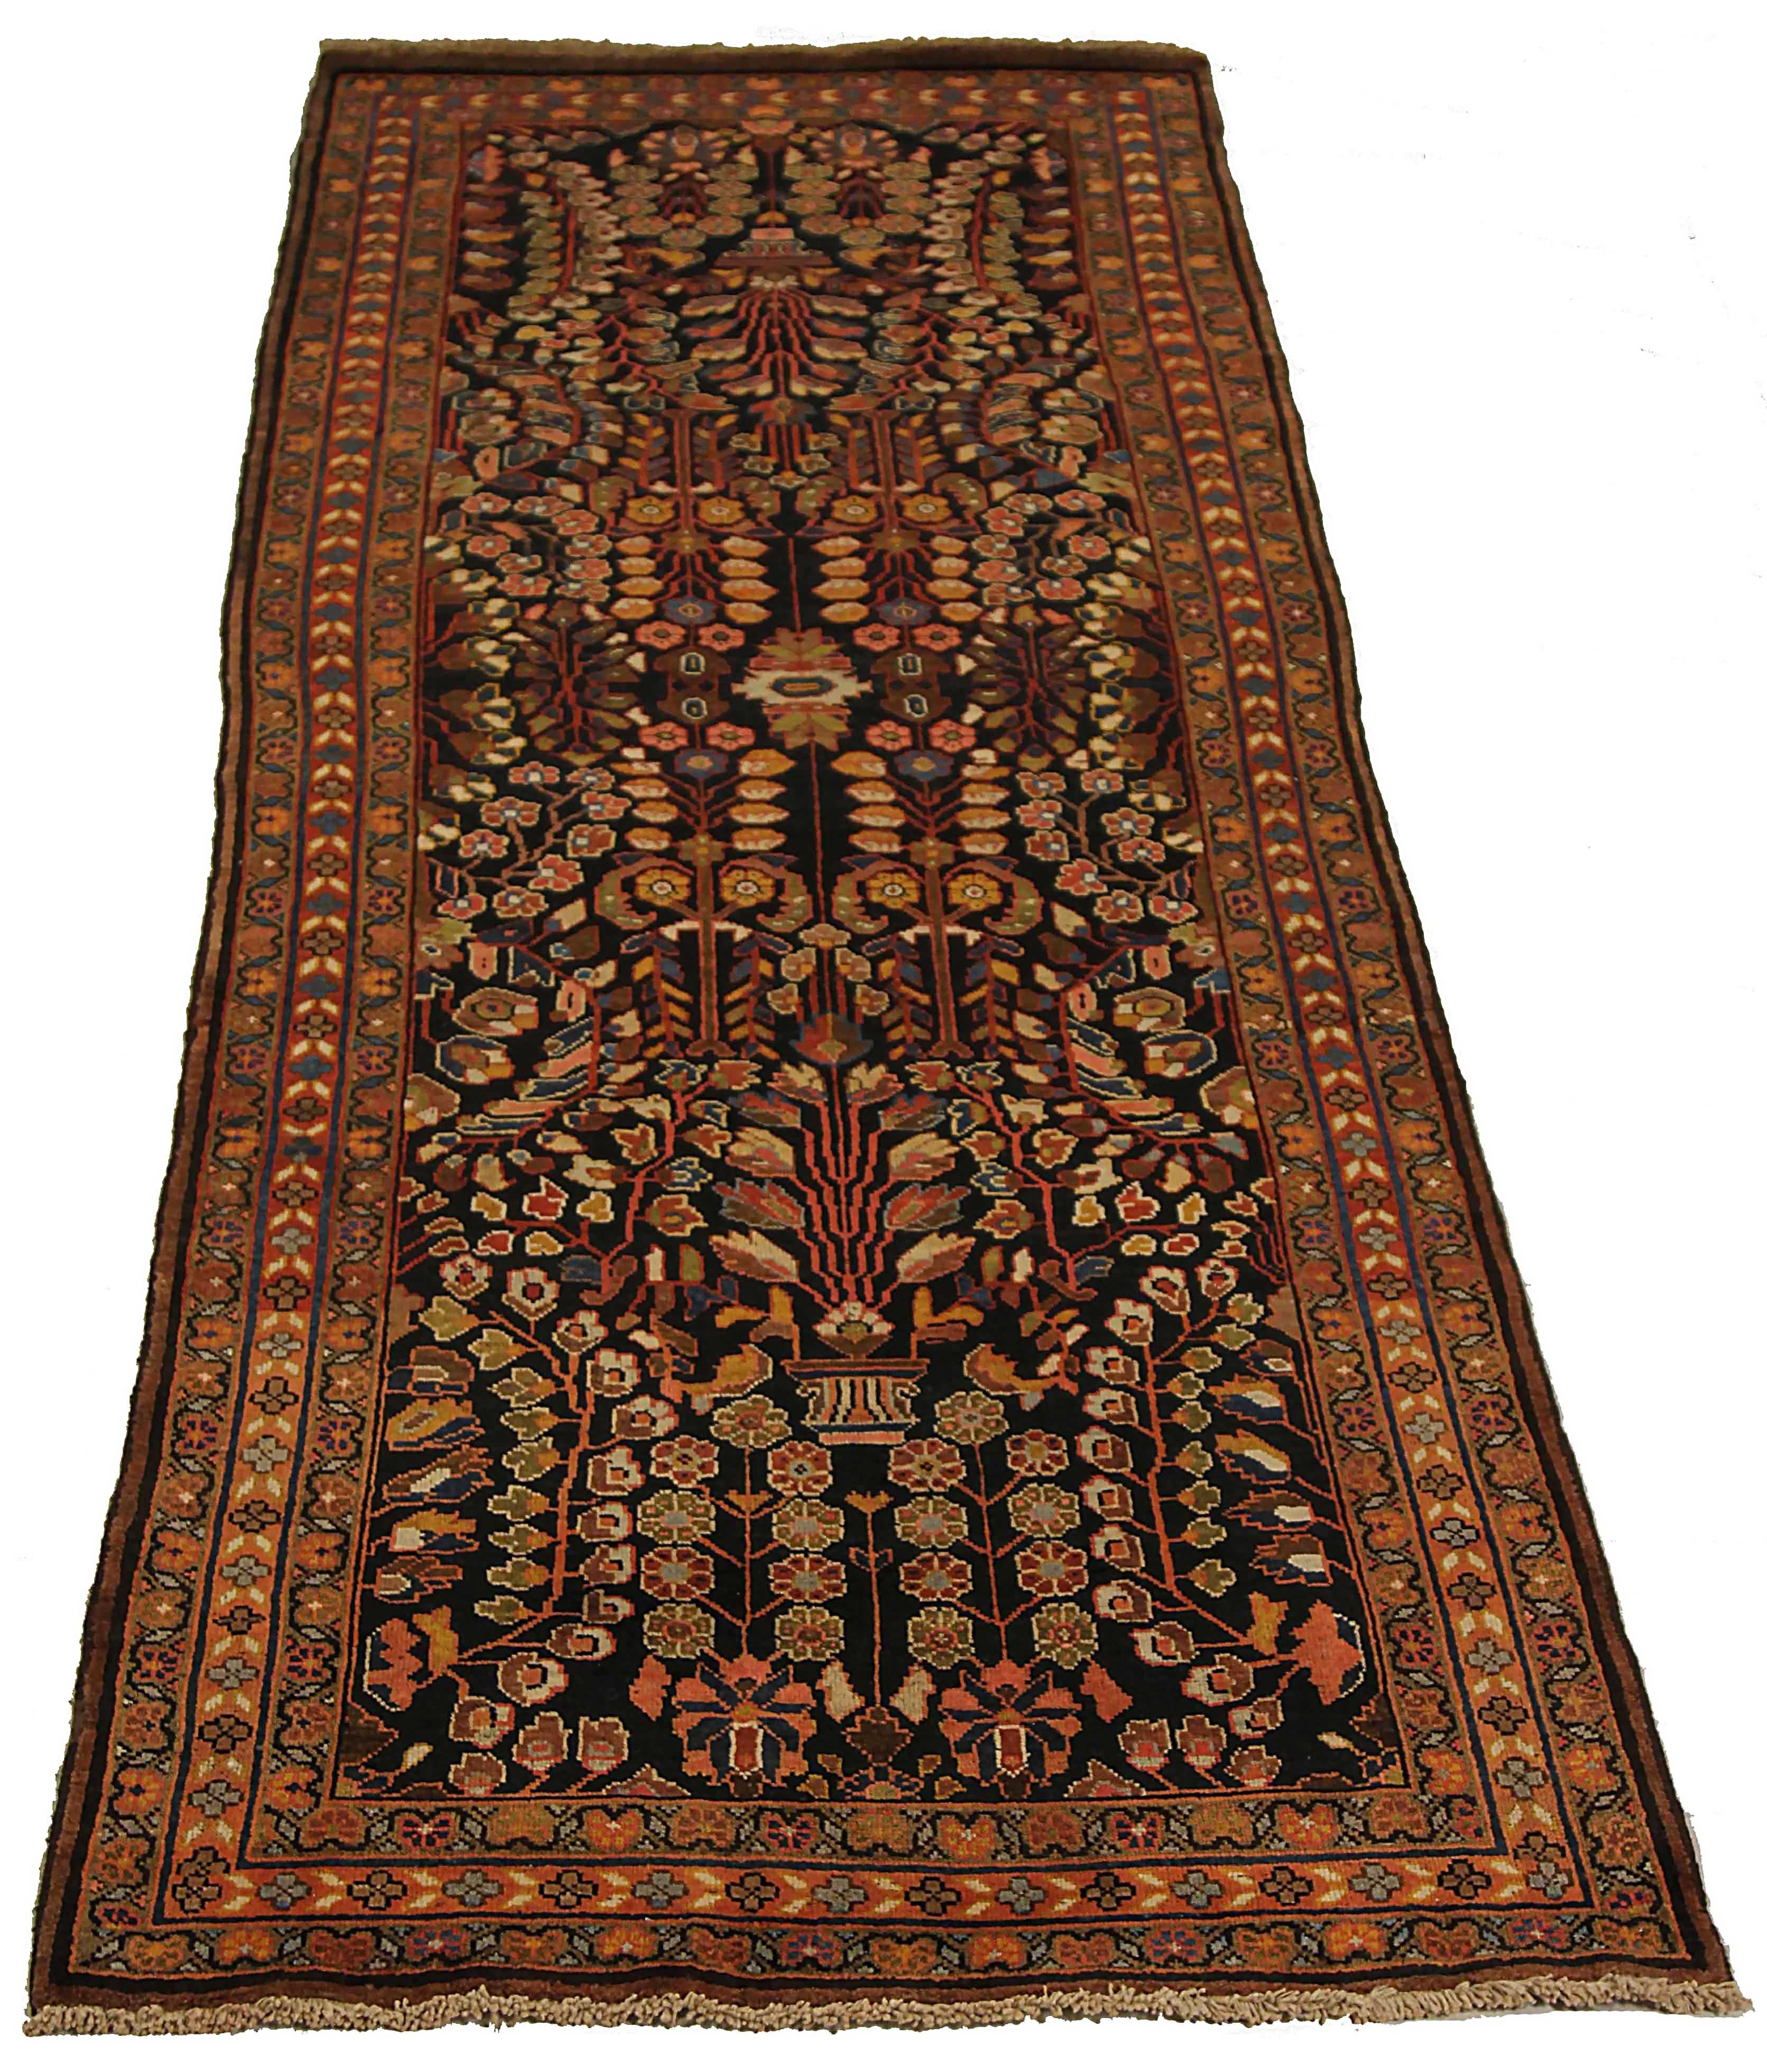 Antique Persian runner rug handwoven from the finest sheep’s wool. It’s colored with all-natural vegetable dyes that are safe for humans and pets. It’s a traditional Farahan design handwoven by expert artisans. It’s a lovely runner rug that can be